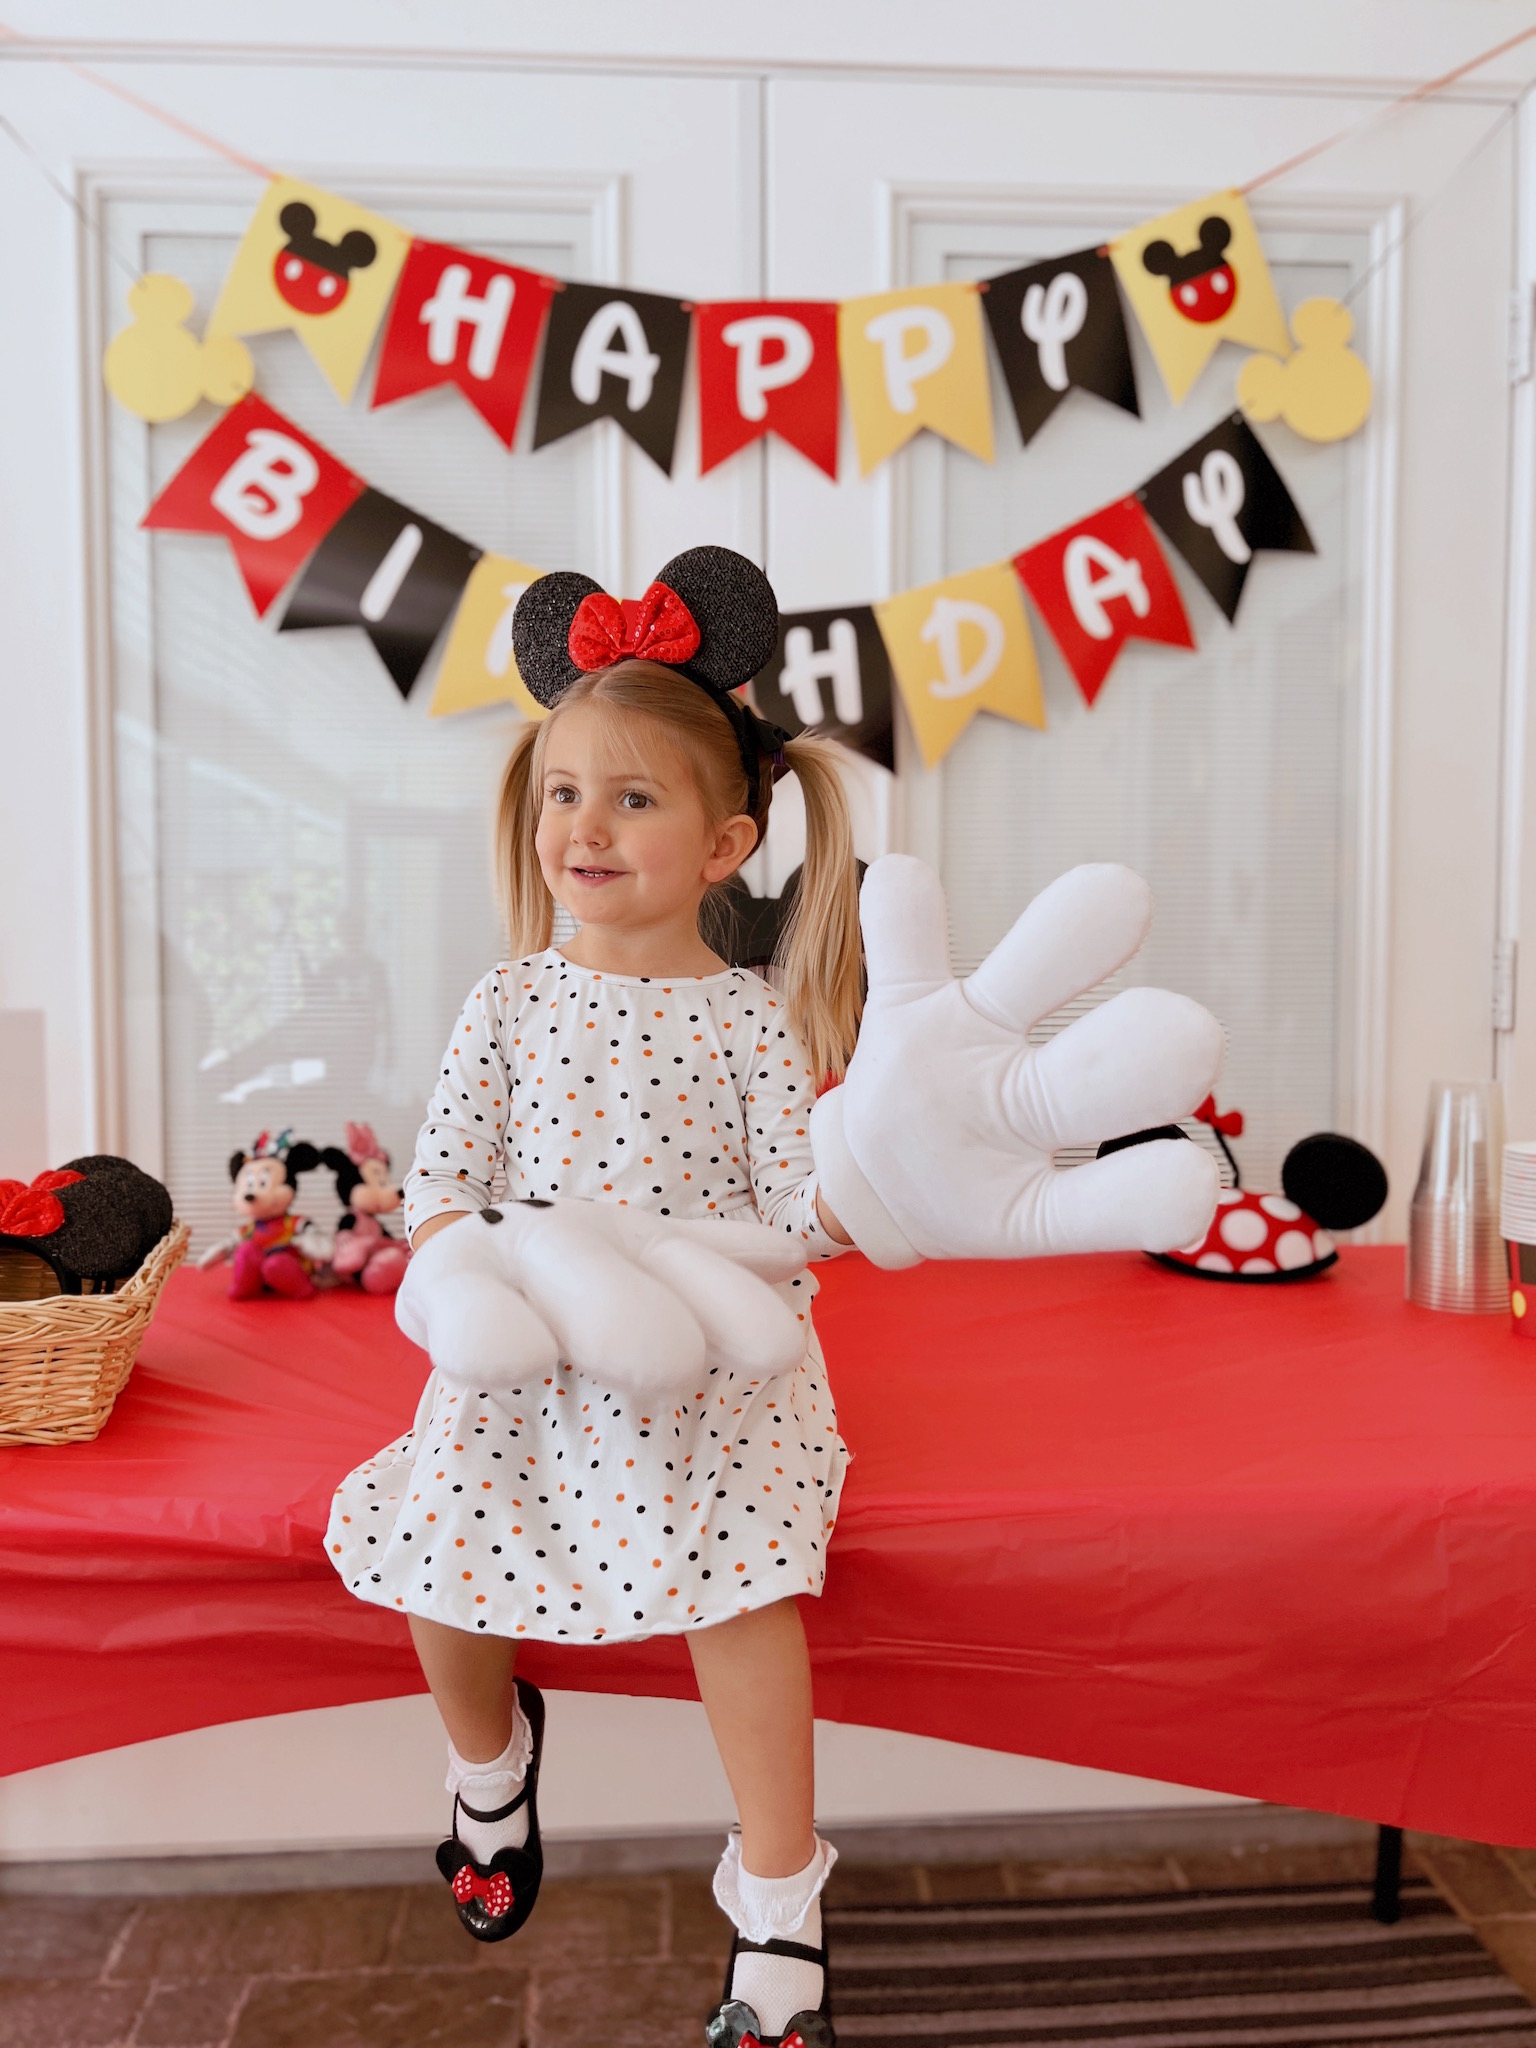 Bring on the Mickey hand props for Pepper's Magical "Mickey & Minnie Mouse" 3rd Birthday Pool Party | Creative ideas for hosting a magical Mickey & Minnie themed birthday bash for your little Mouseketeer with do-able decor, punny snacks, and party games that are fun for all ages! via thinkingcloset.com